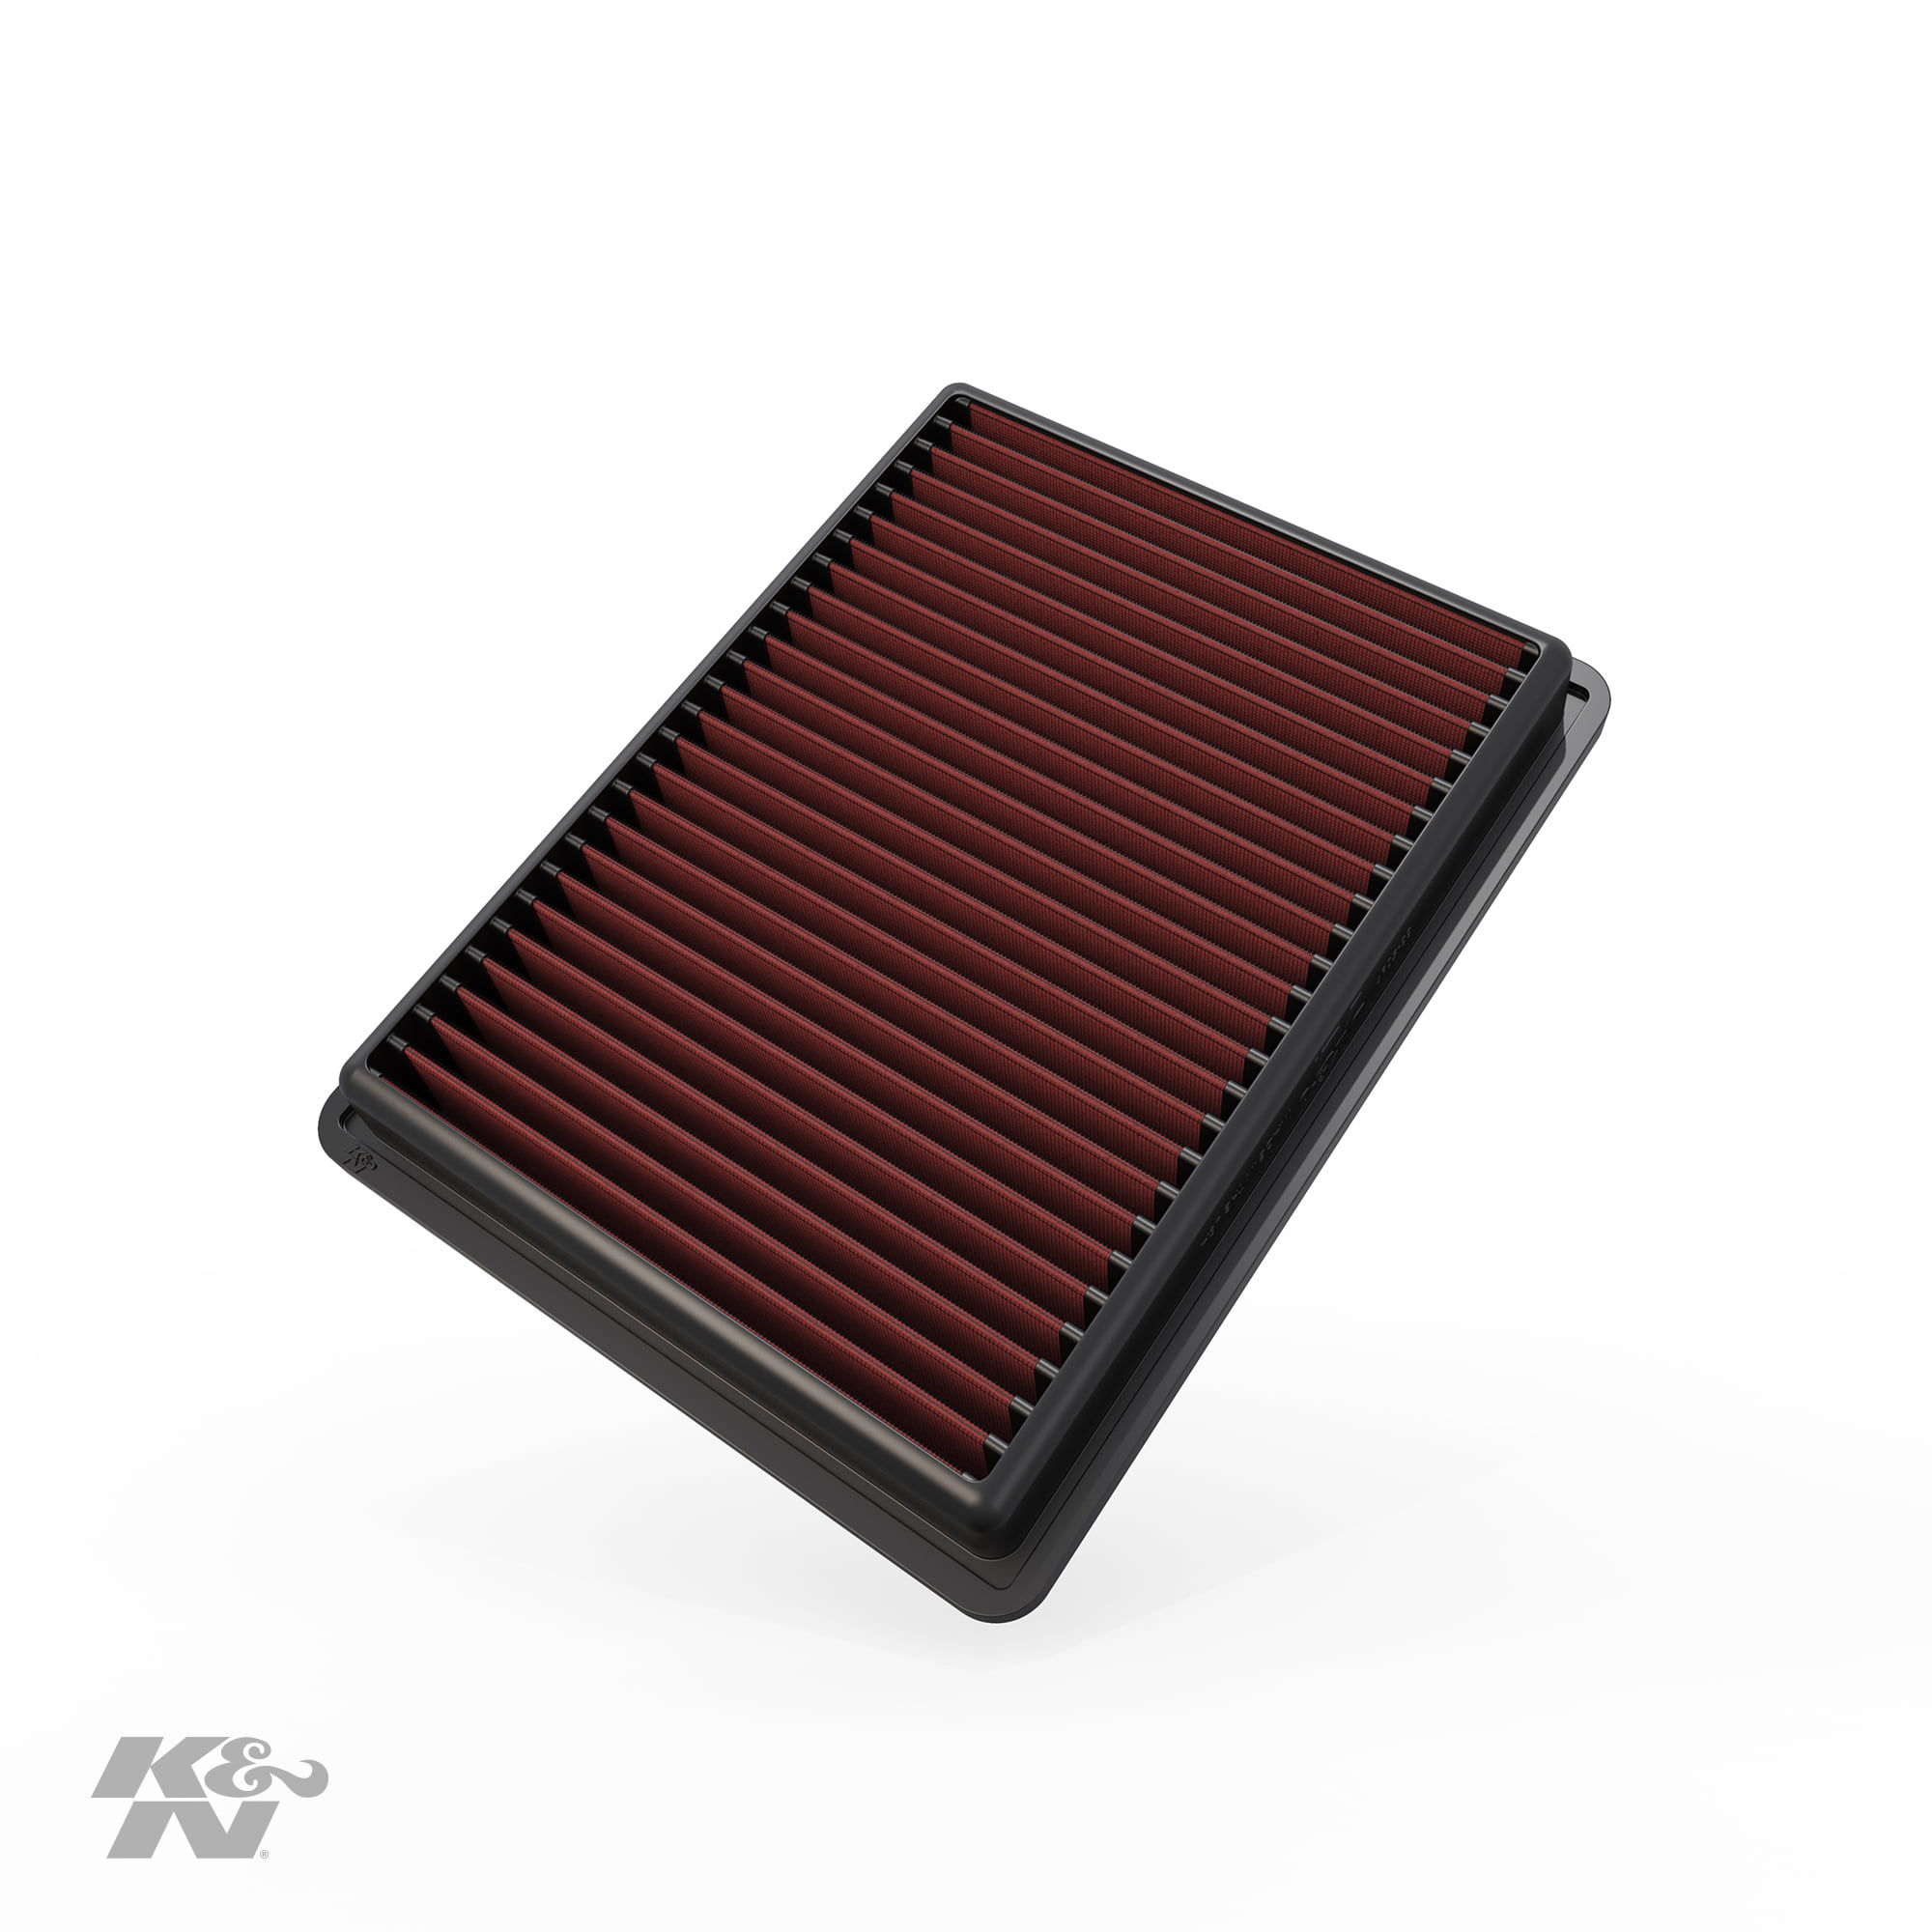 K&N Engine Air Filter: High Performance, Premium, Washable, Replacement Filter: 2018-2019 Chevy Engine Air Filter For 2019 Chevy Equinox